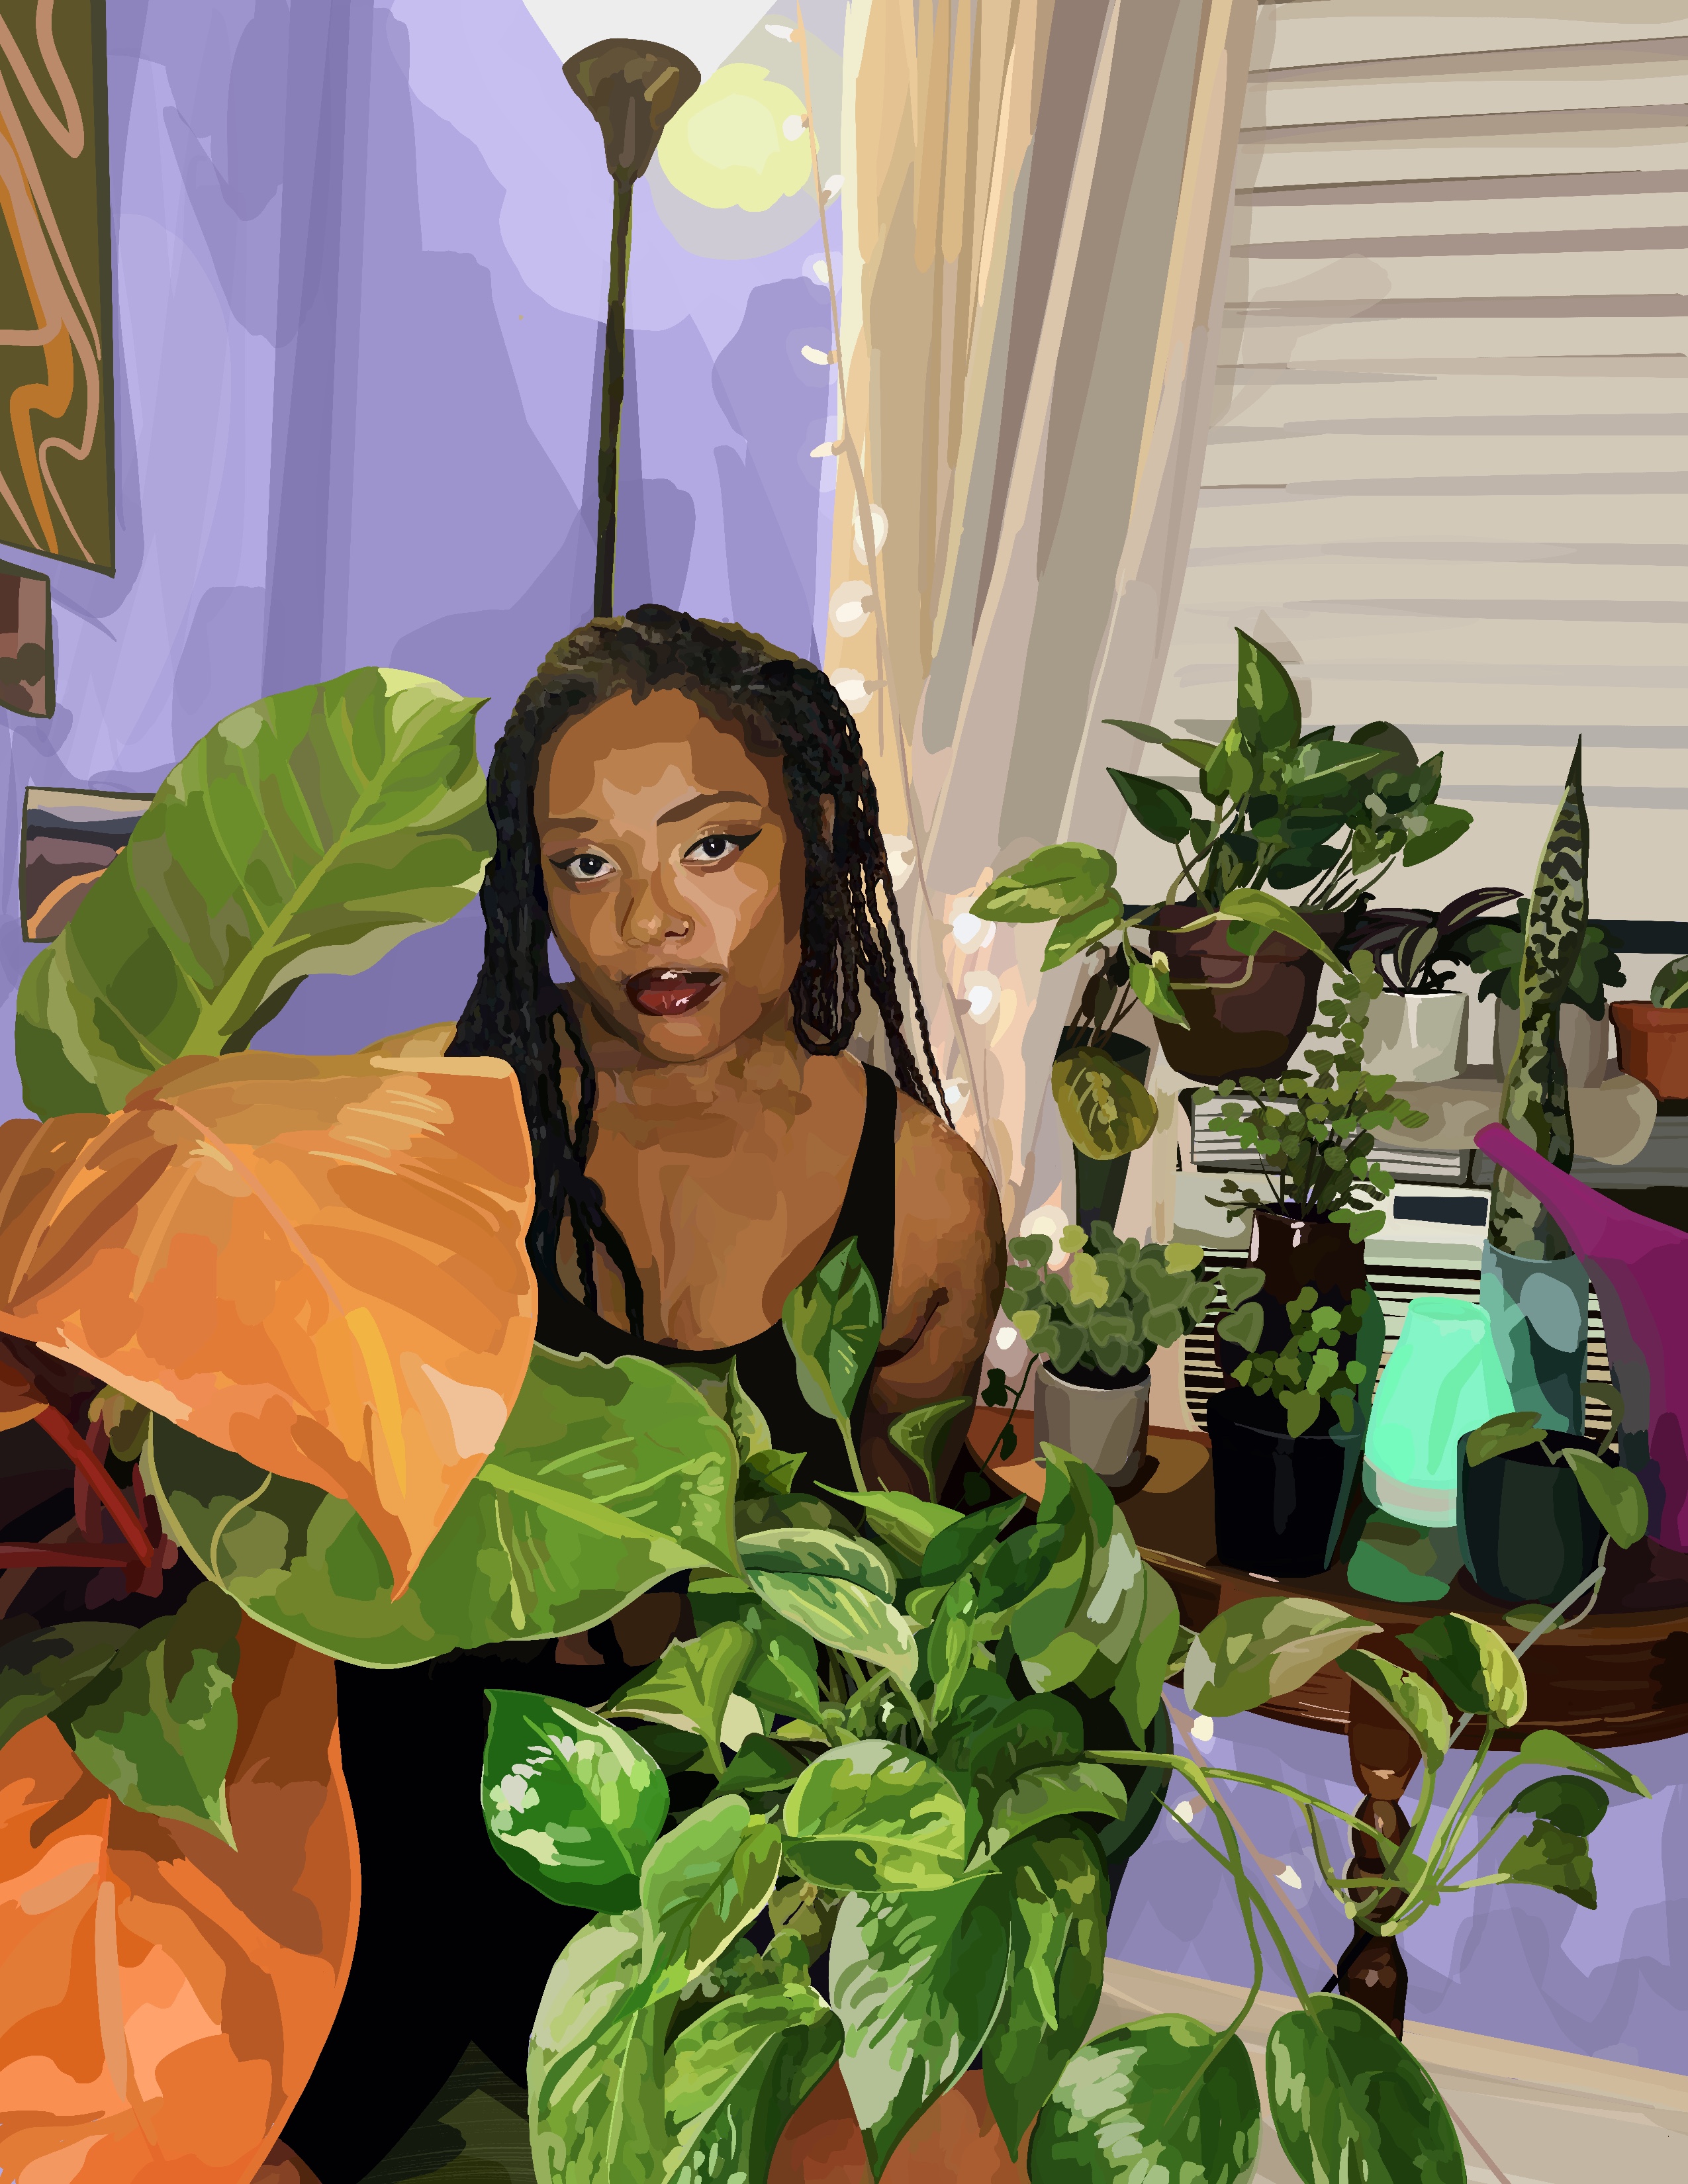 woman in room with plants surrounding her at a window